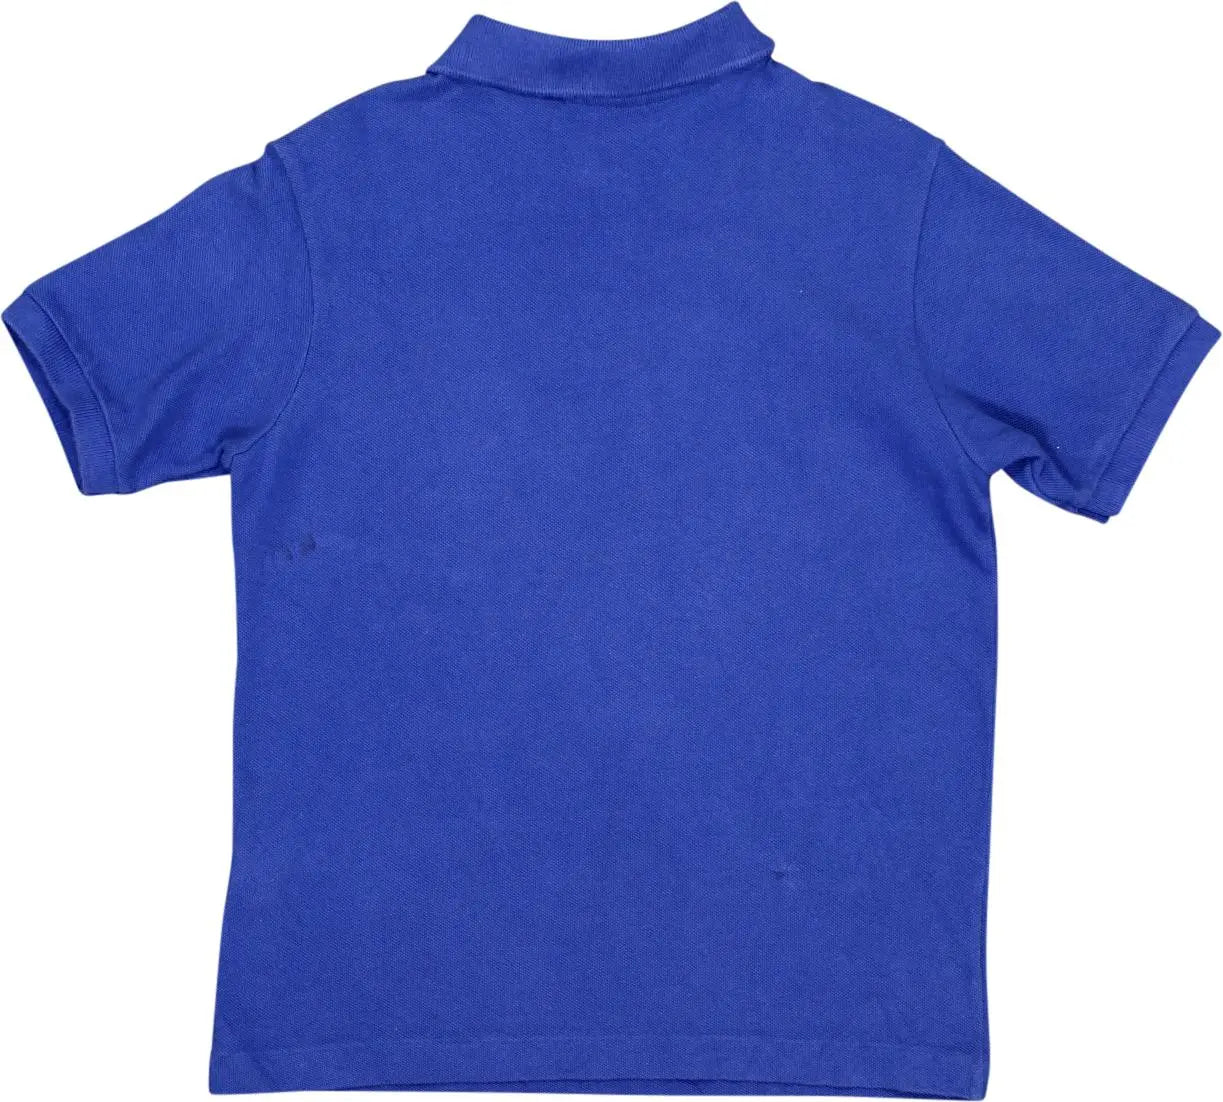 Lacoste - Blue Polo Shirt by Lacoste- ThriftTale.com - Vintage and second handclothing